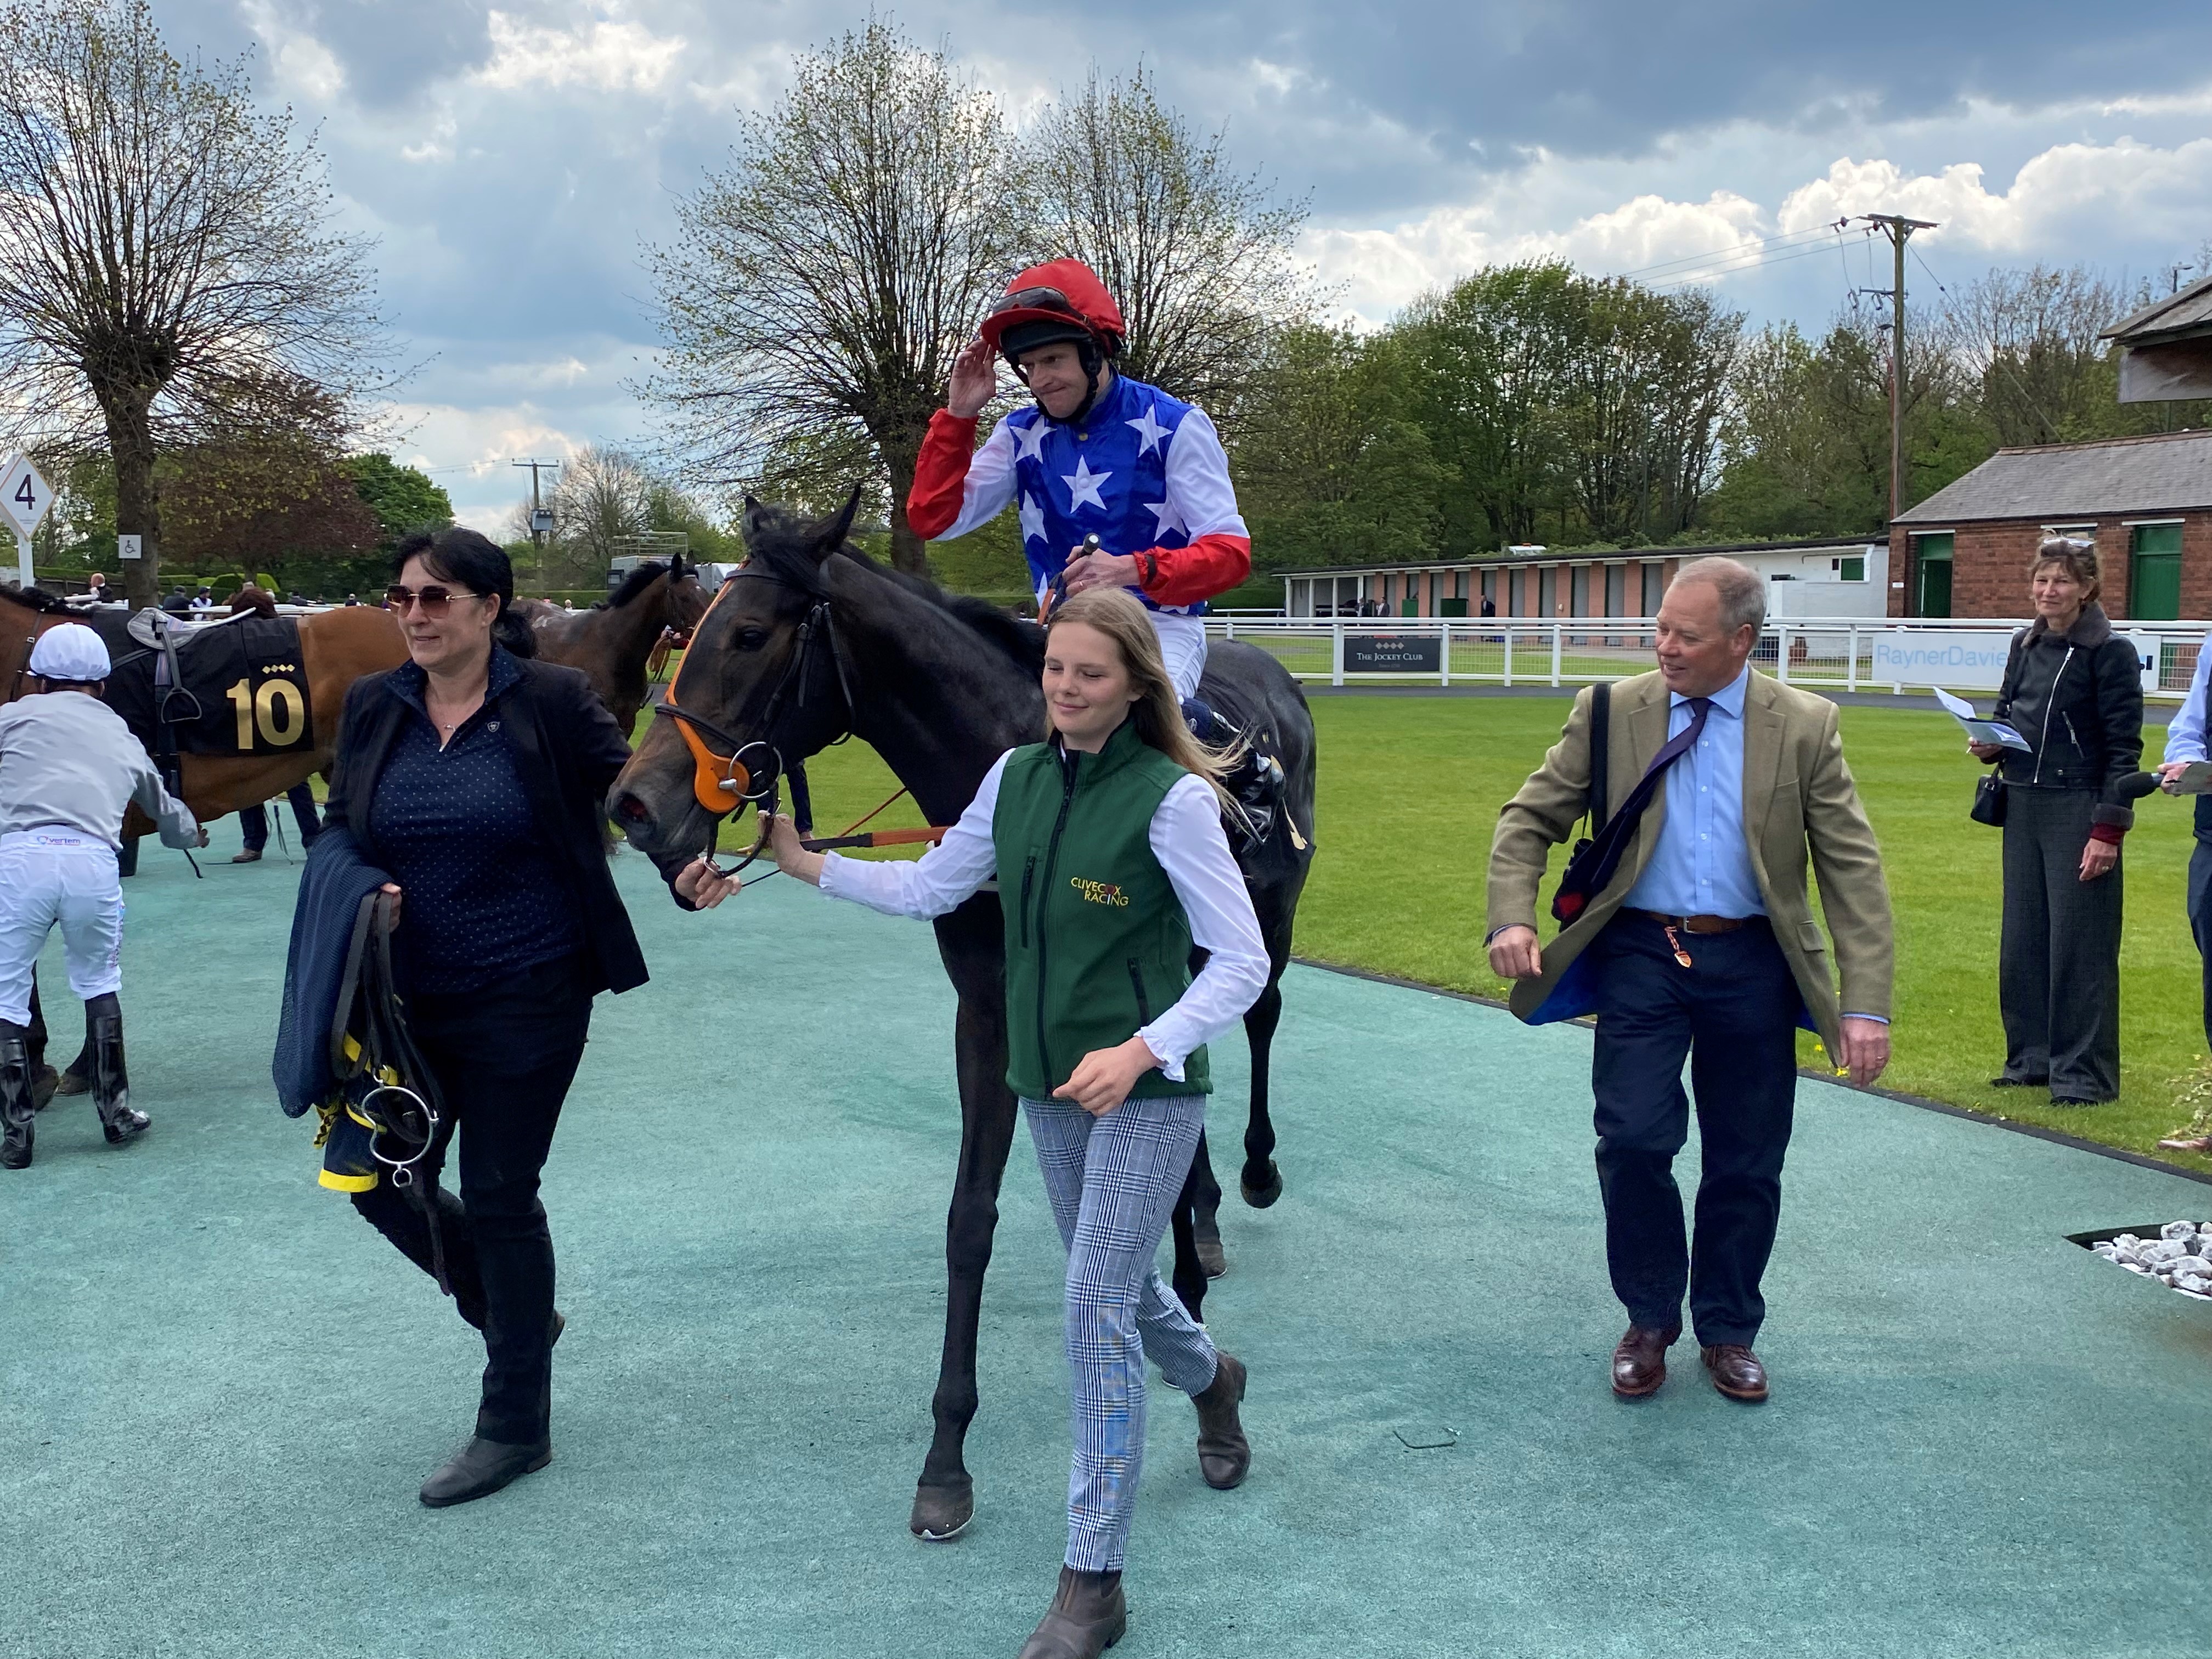 Clive Cox's Lost Angel winning at Nottingham